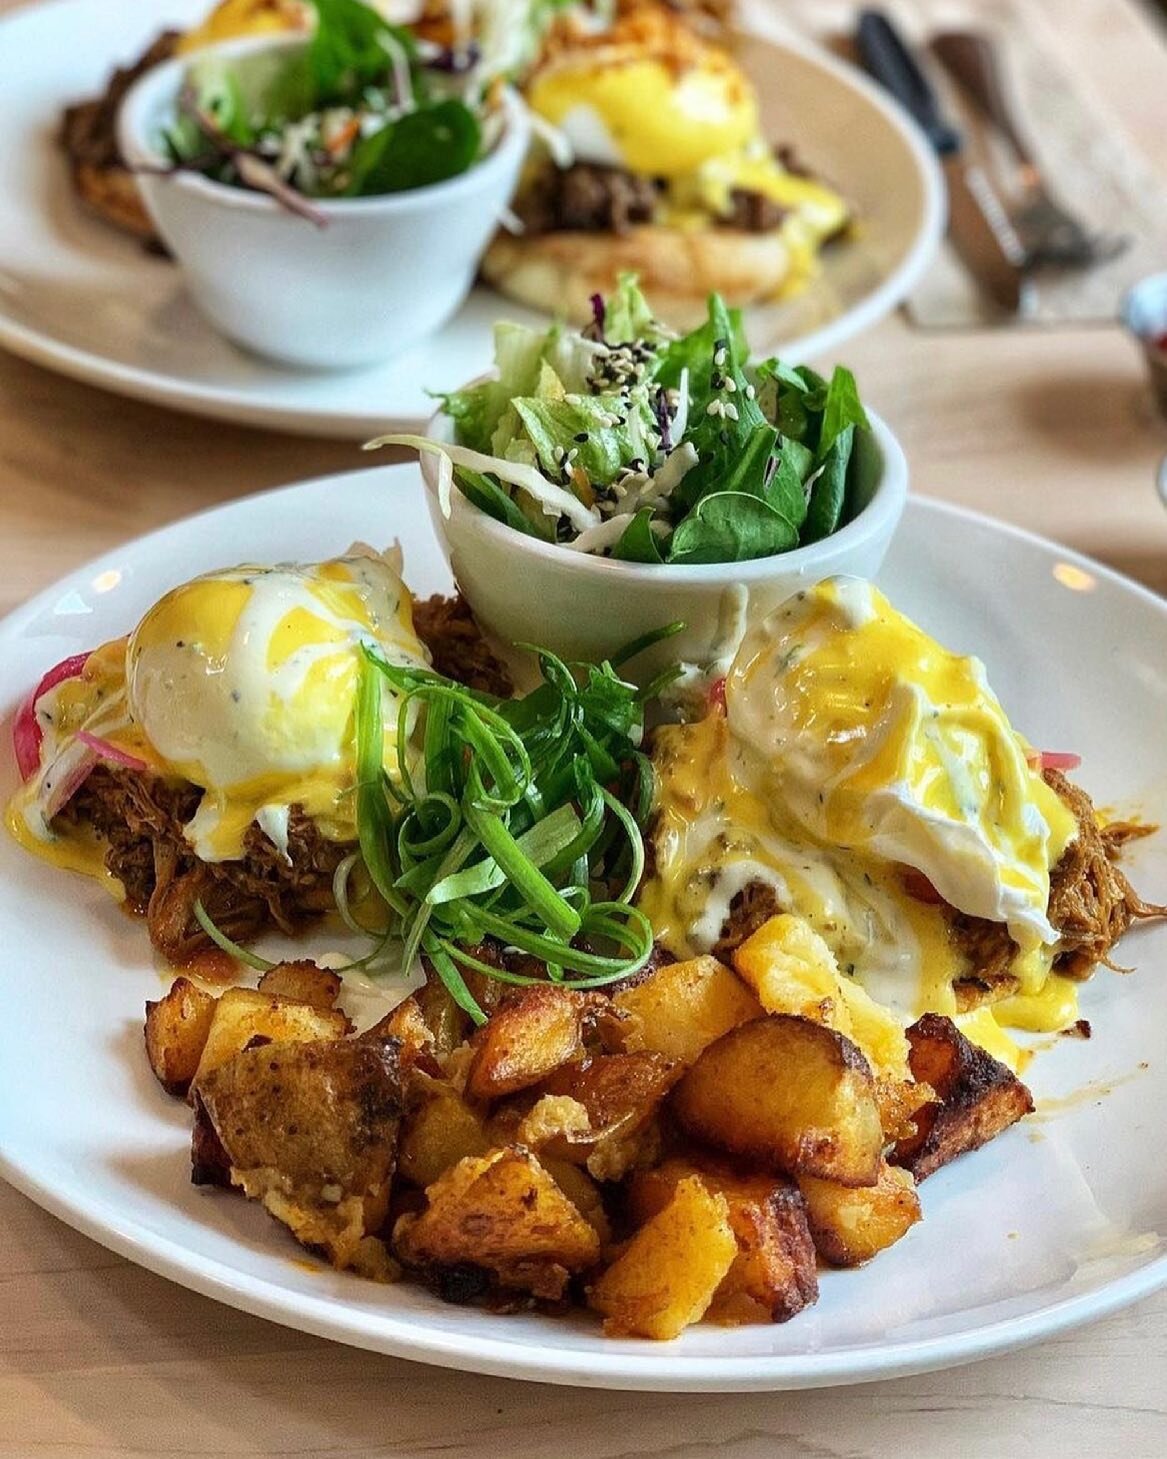 Recreate brunch at home 🍳🥗🥓 we&rsquo;re open every day of the long weekend 8:30am to 2:30pm 🌞

📸:@munchingmel_